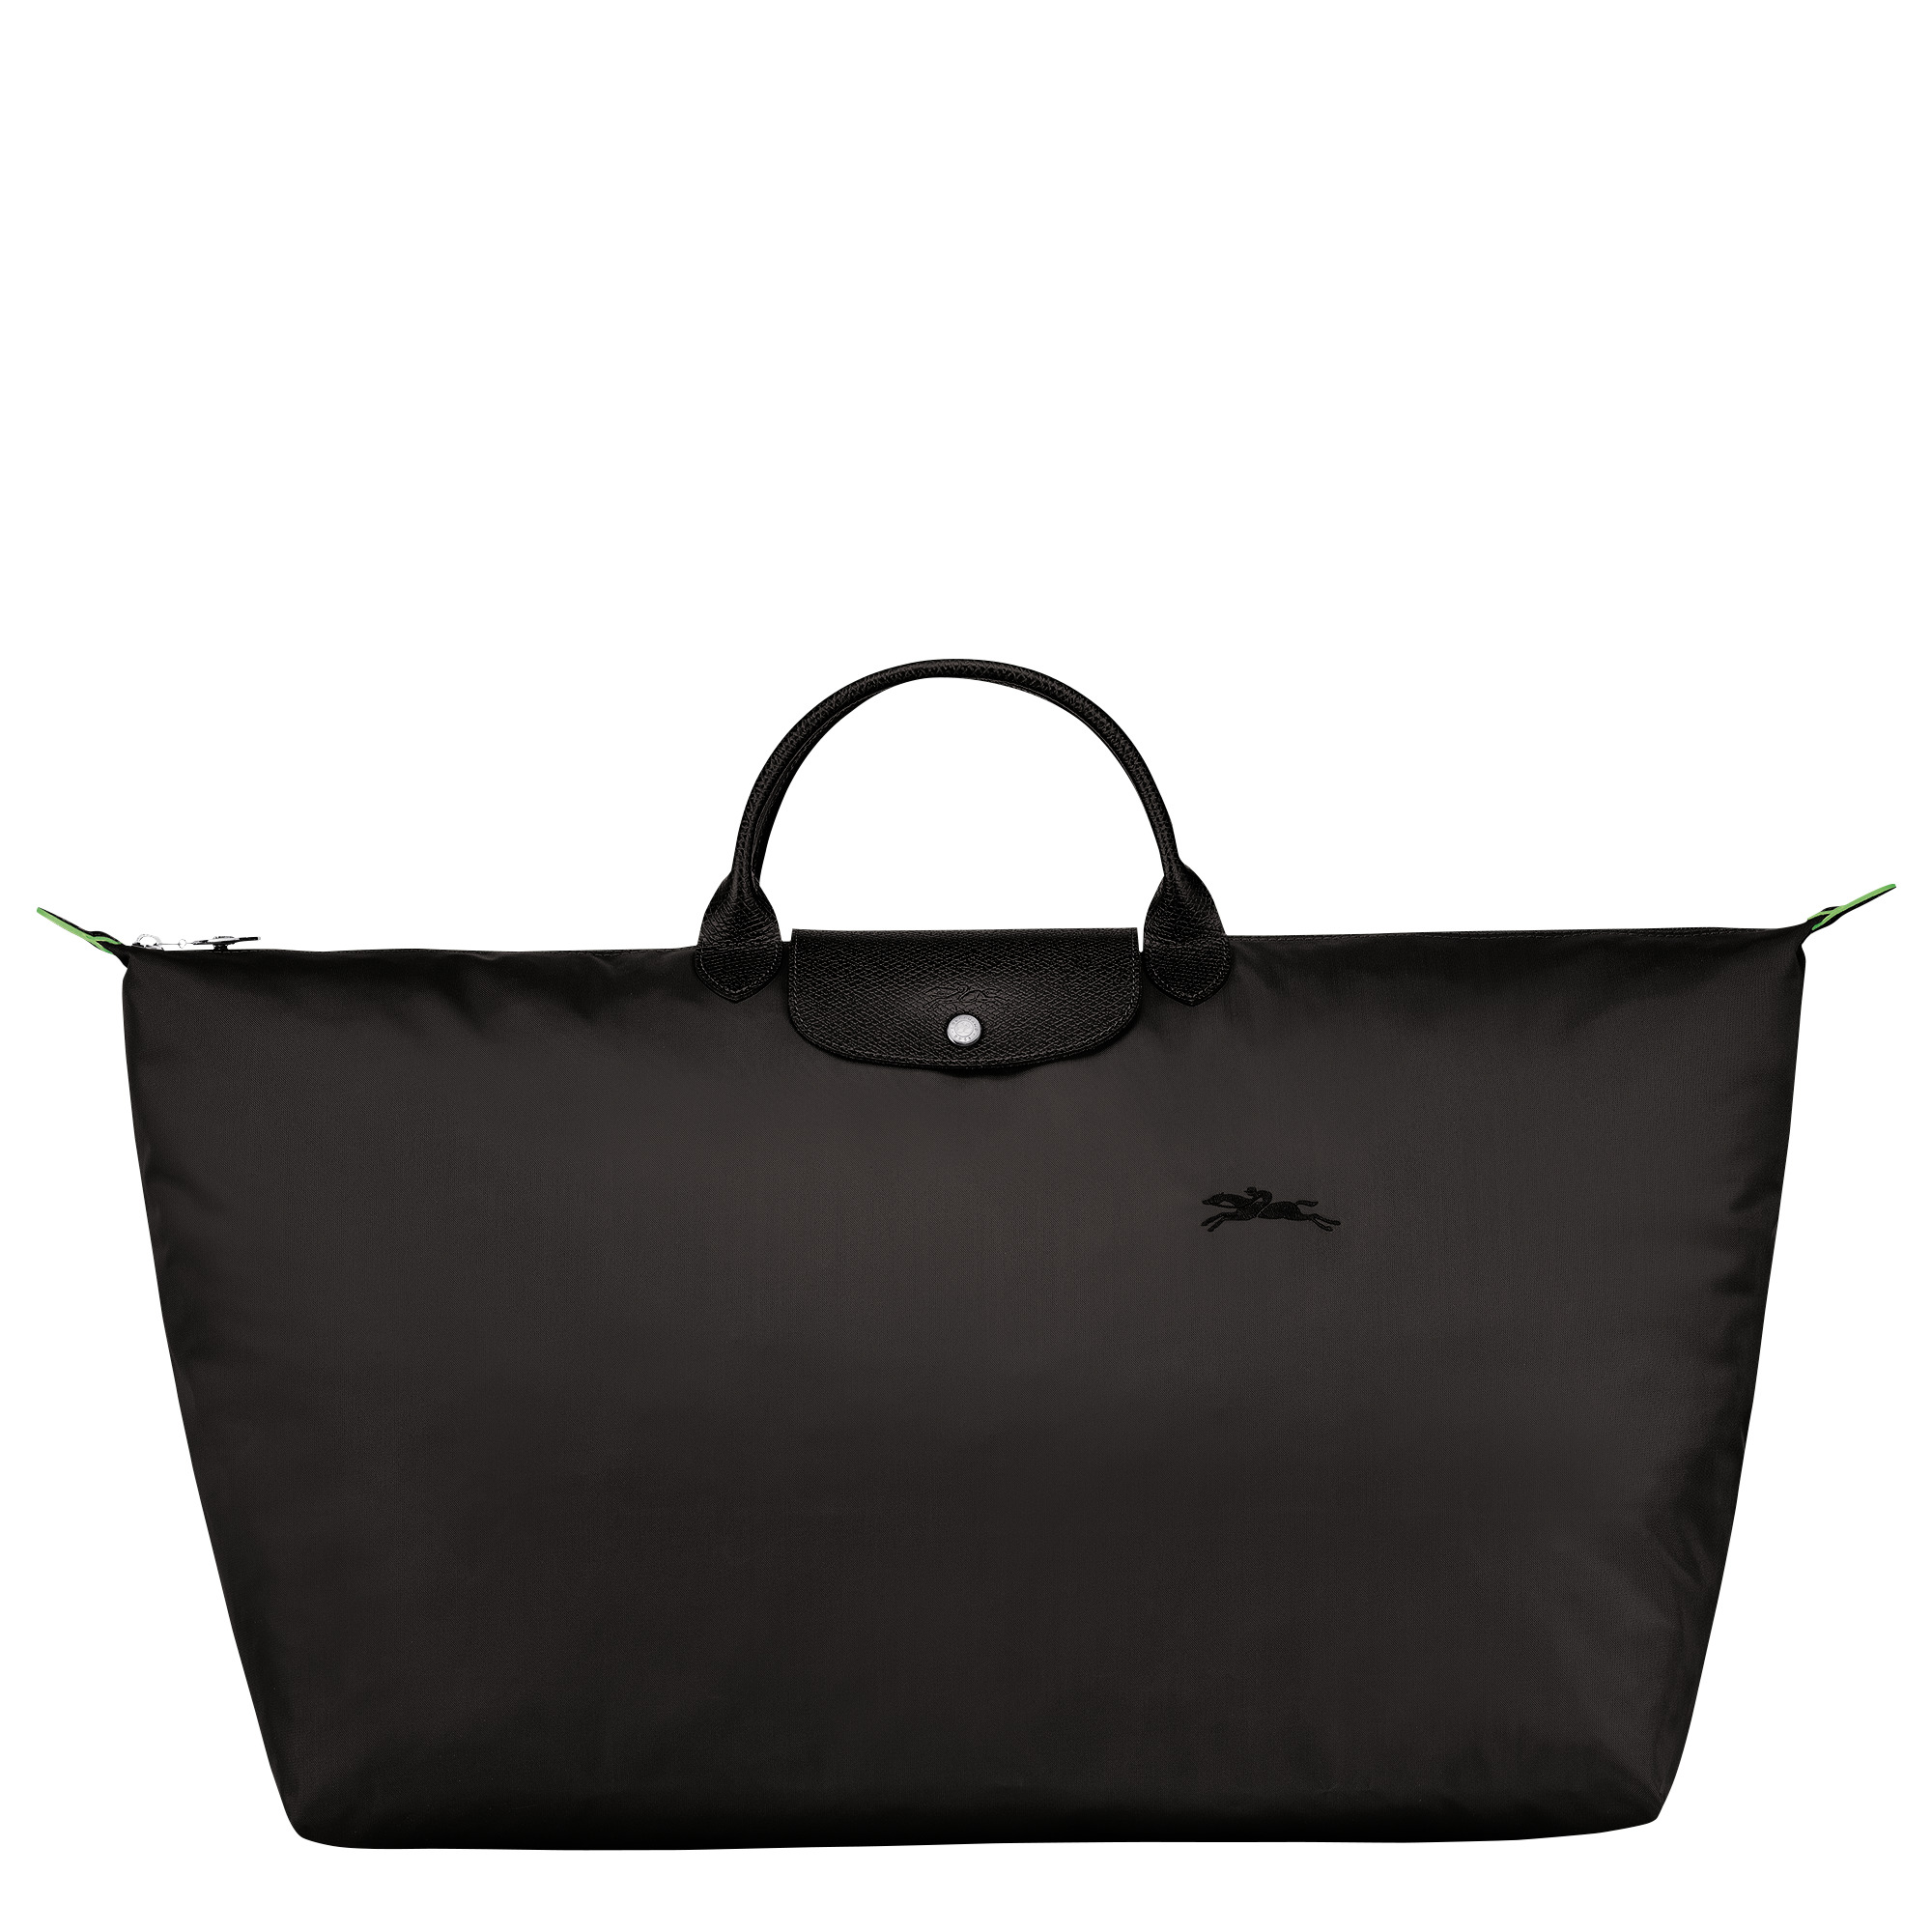 Le Pliage Green M Travel bag Black - Recycled canvas - 1